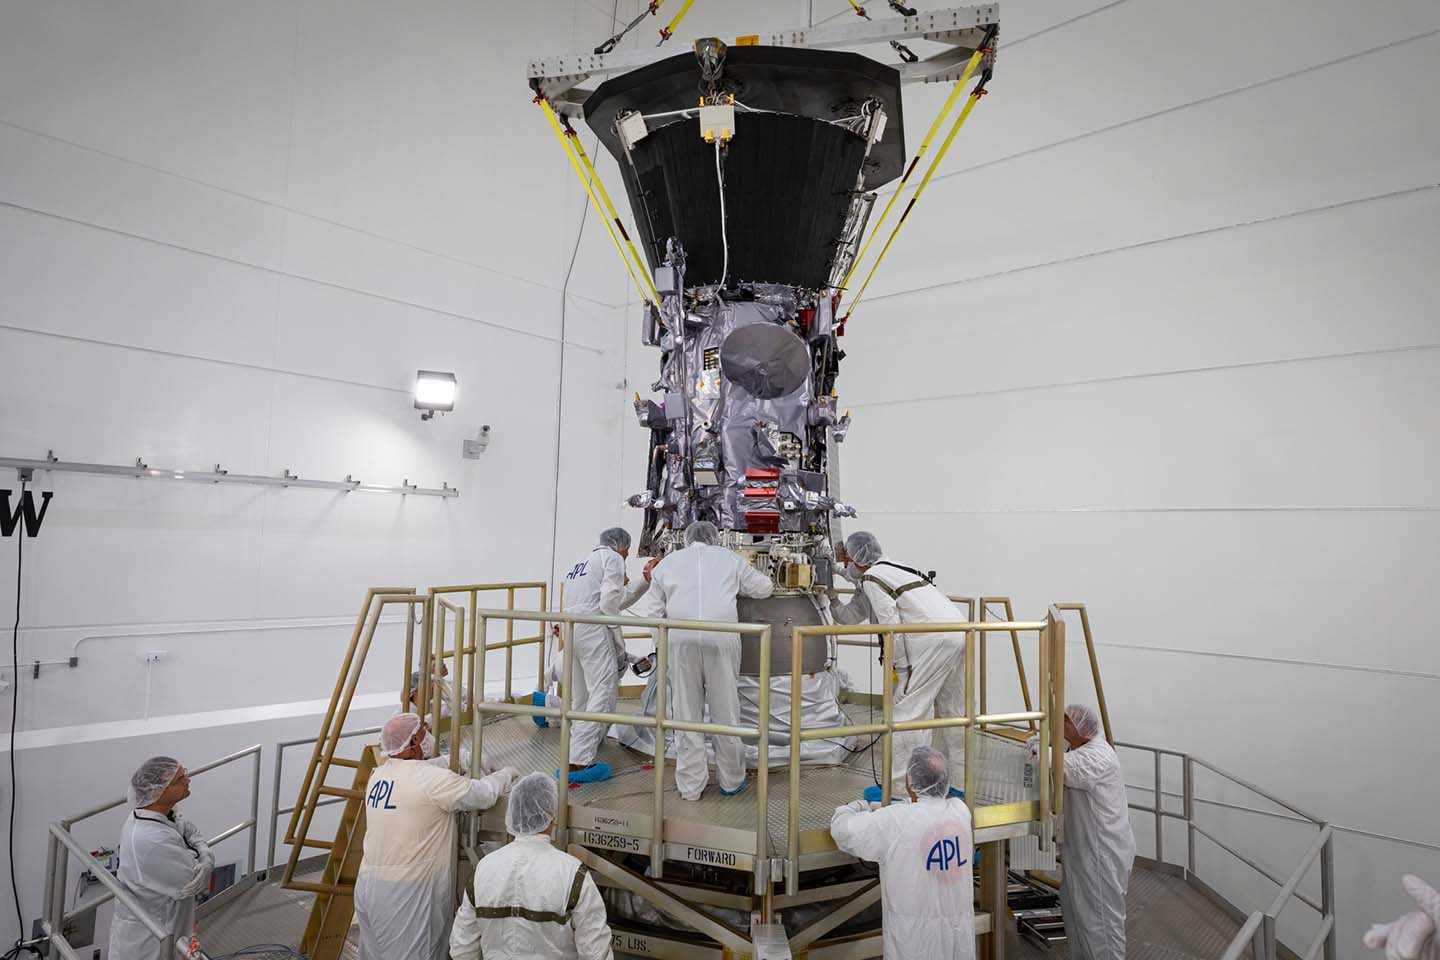 NASA’s Parker Solar Probe is mated to the third stage rocket motor